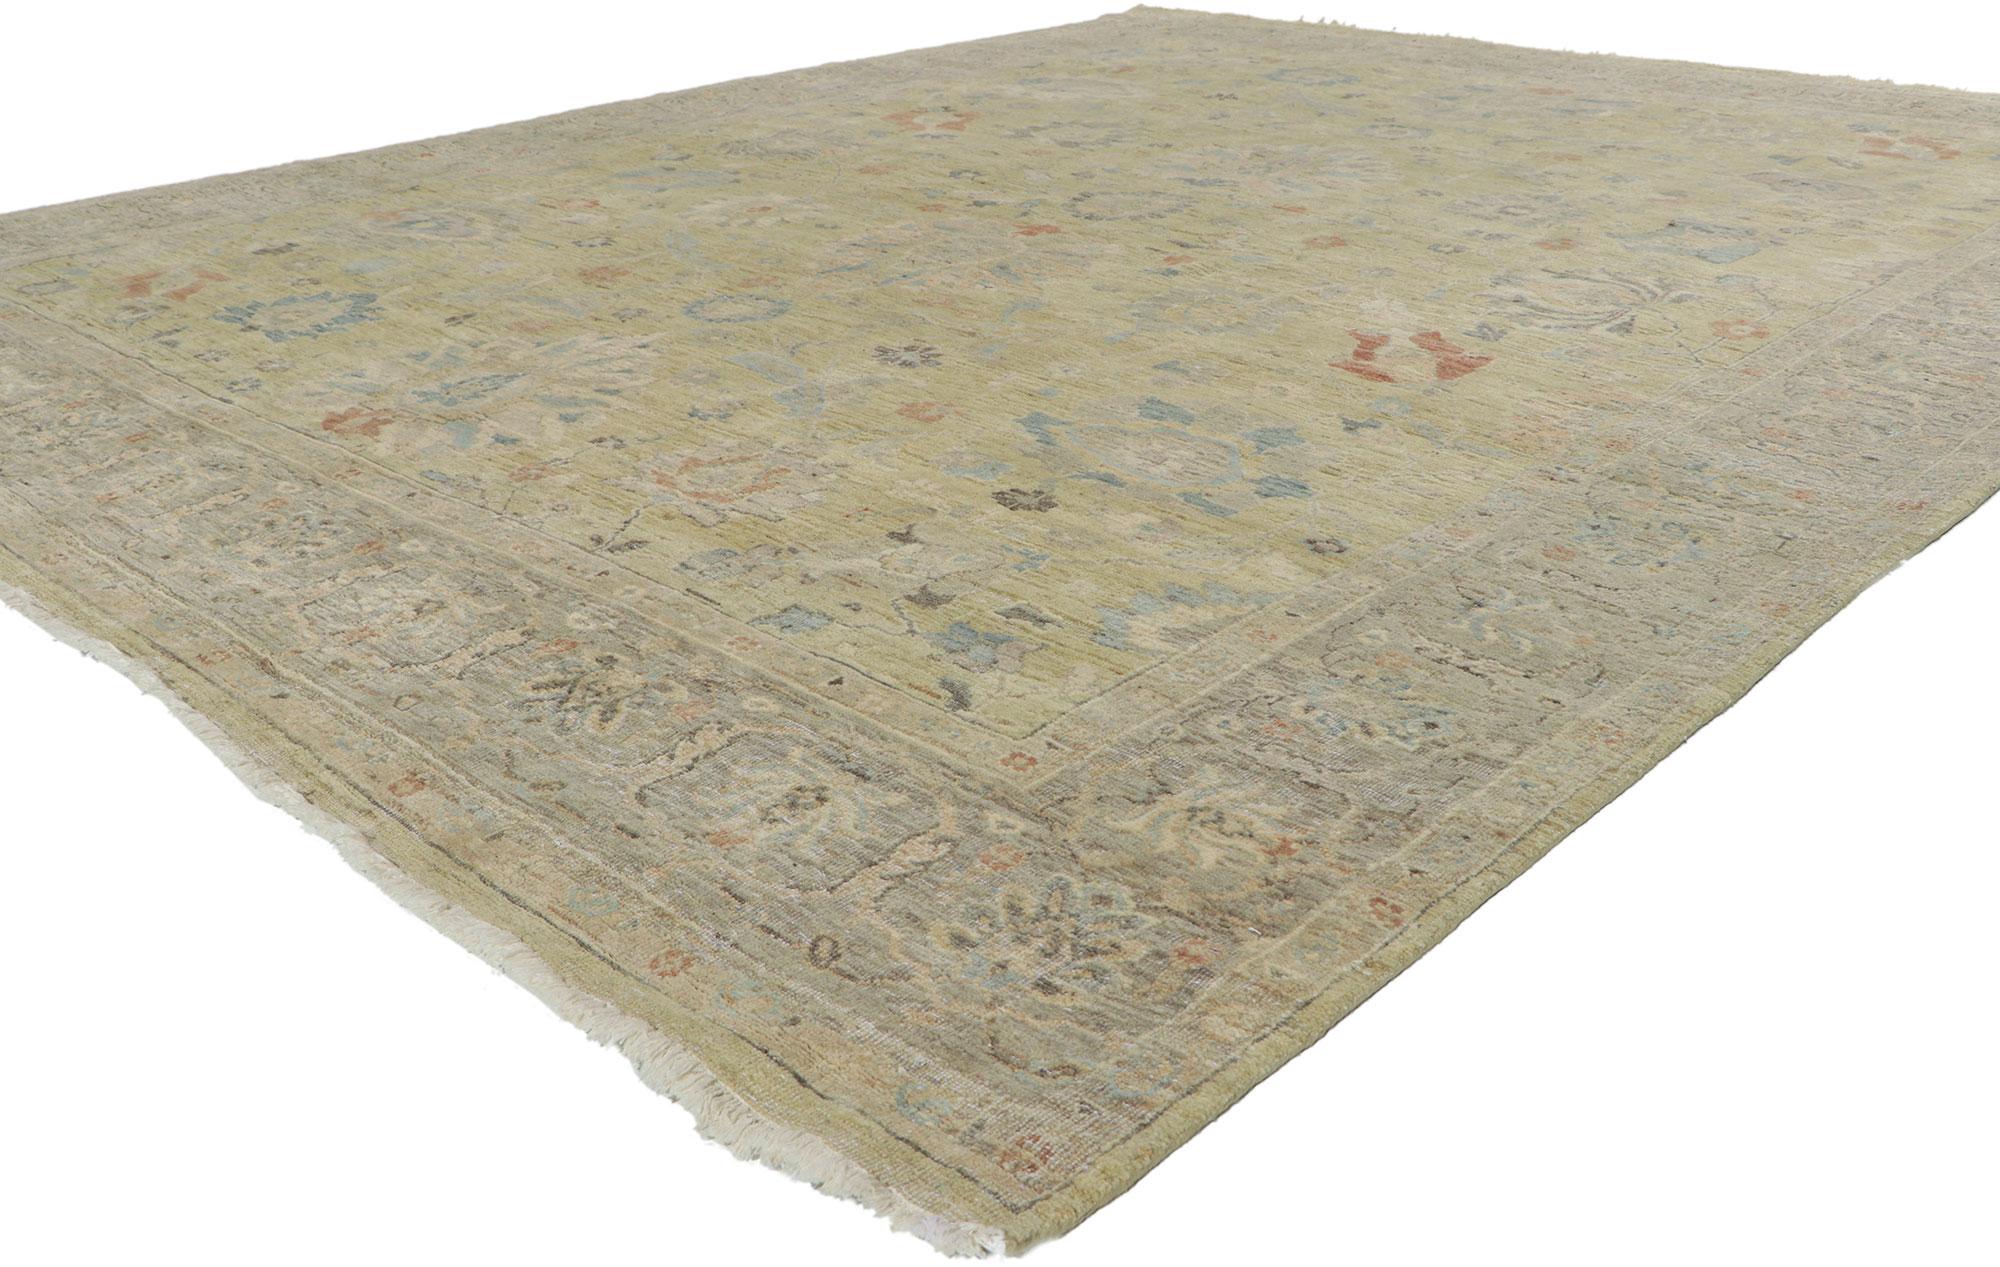 30838 New Distressed Oushak Rug with Vintage Style 07'11 x 09'10. Emanating traditional sensibility and rugged beauty with a earthy colorway, this hand-knotted wool distressed Indian Oushak rug creates an inimitable warmth and calming ambiance. The